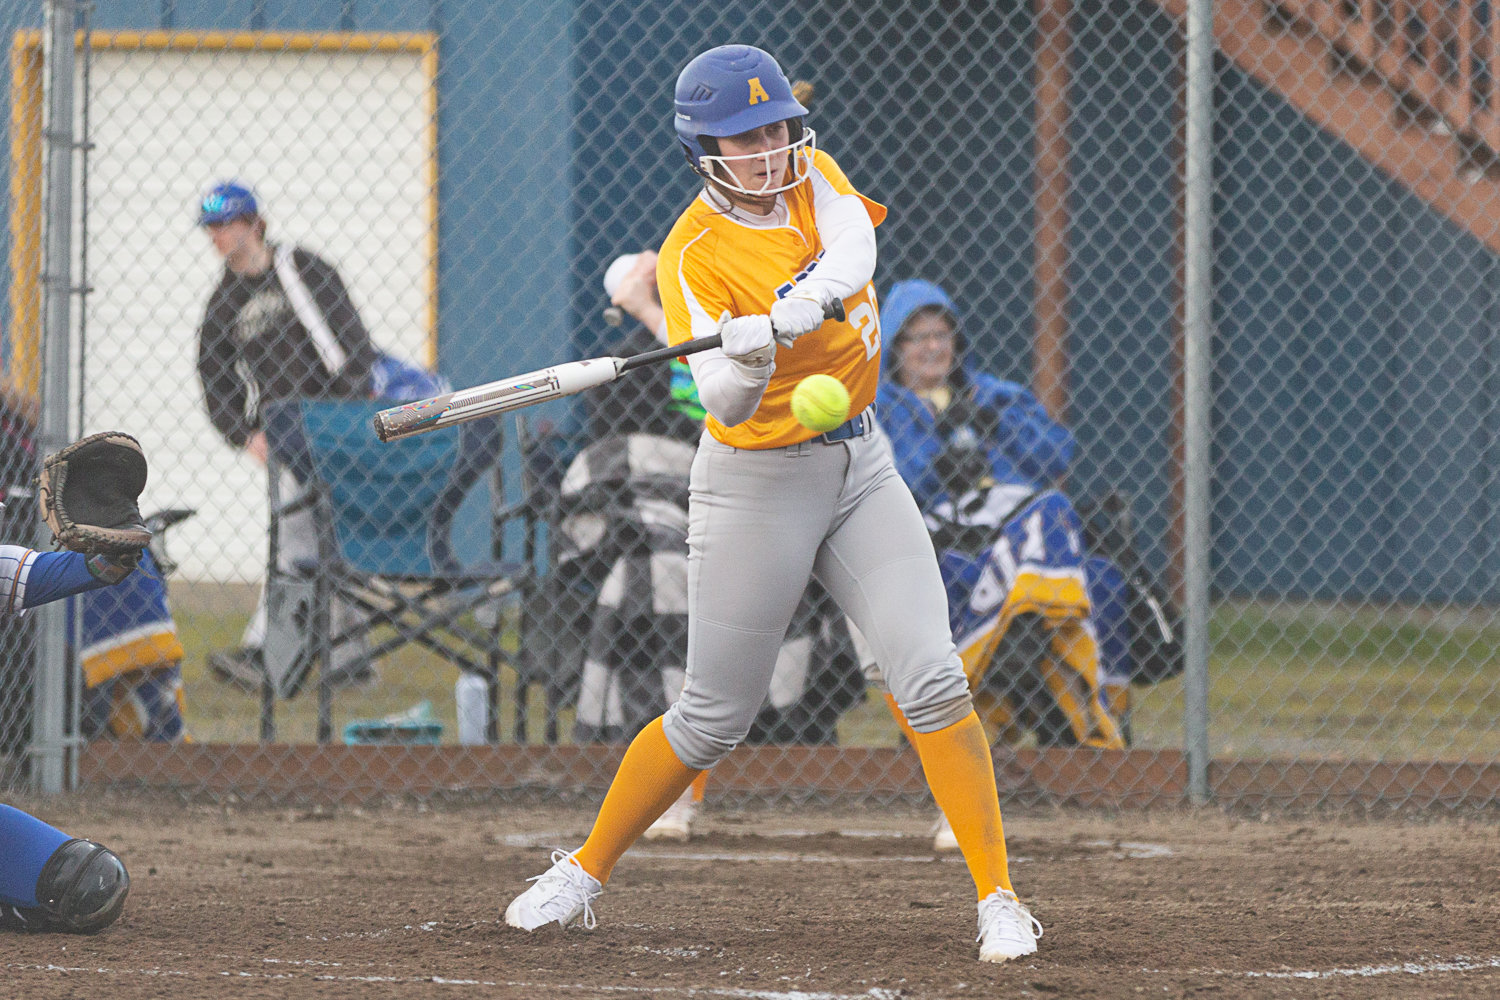 Adna's Karlee VonMoos swings at a pitch against Rochester March 15.